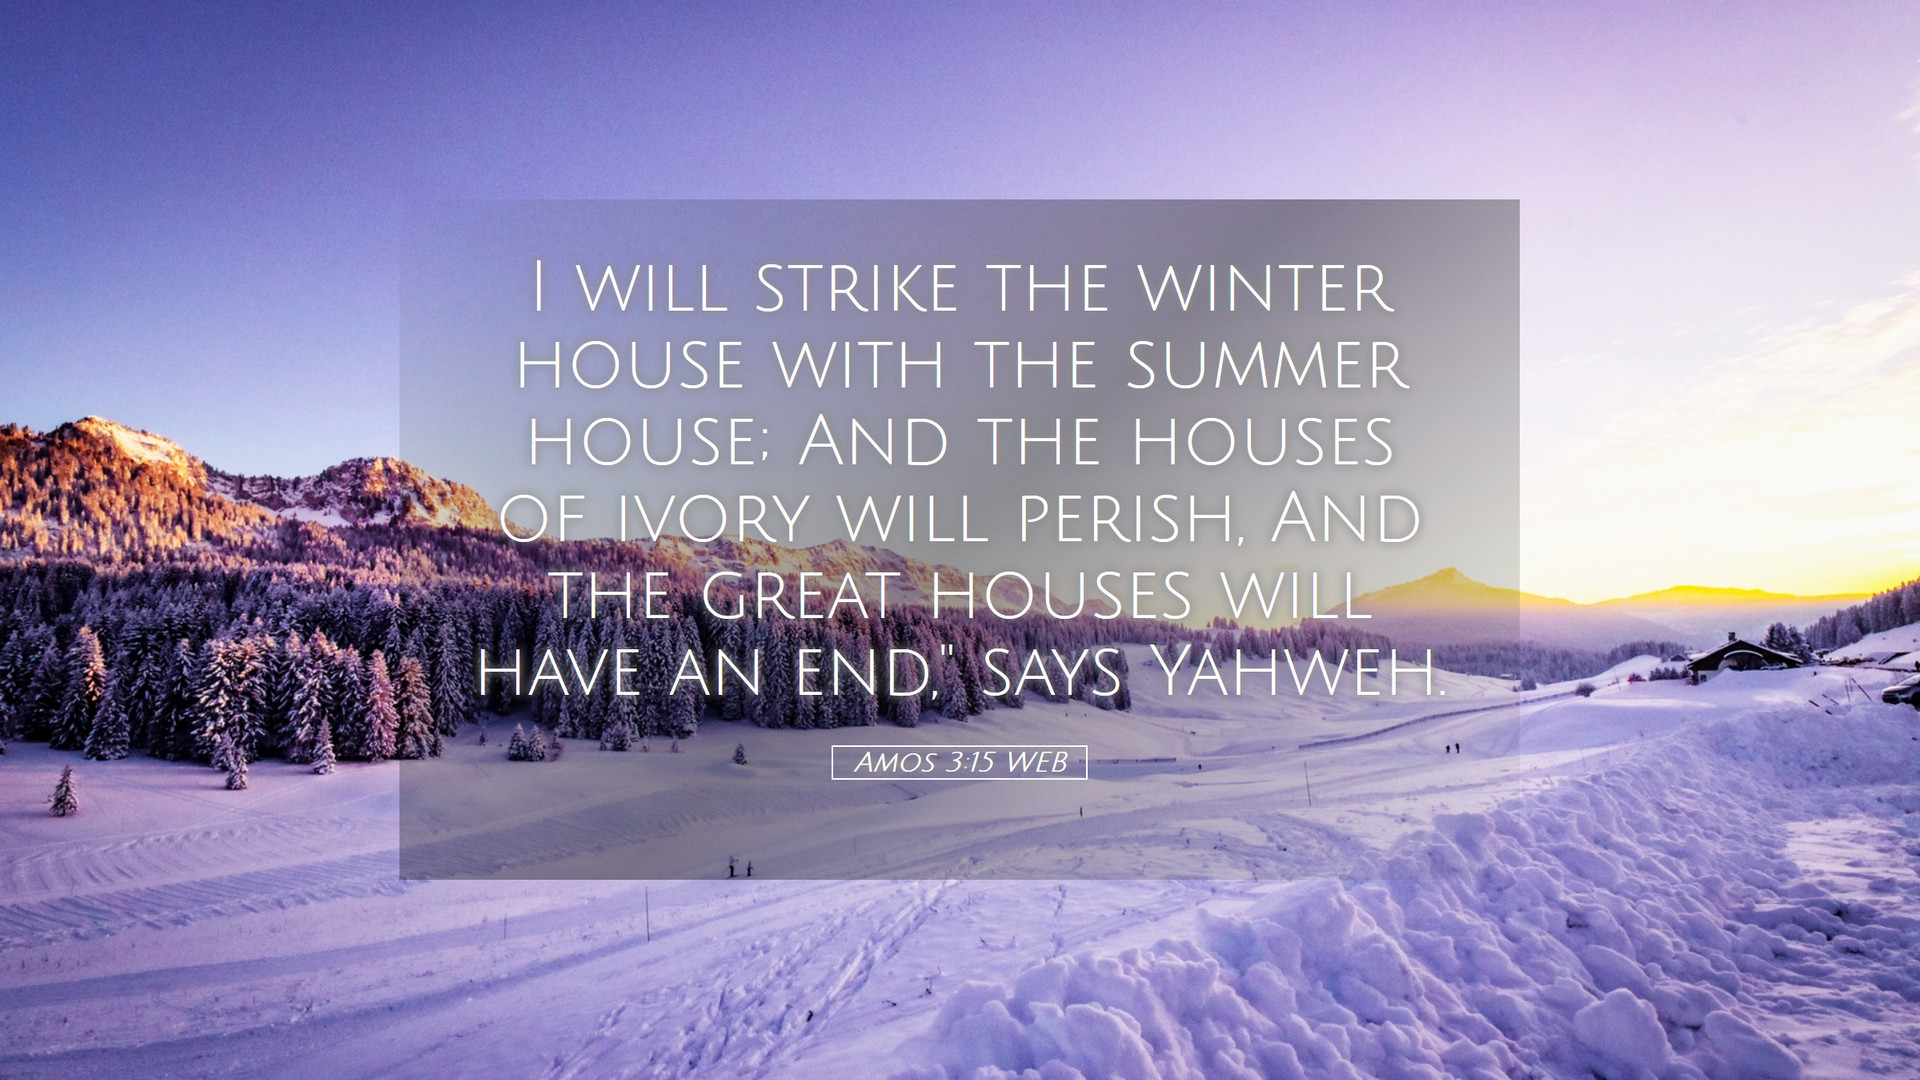 Amos 3:15 WEB Desktop Wallpaper will strike the winter house with the summer